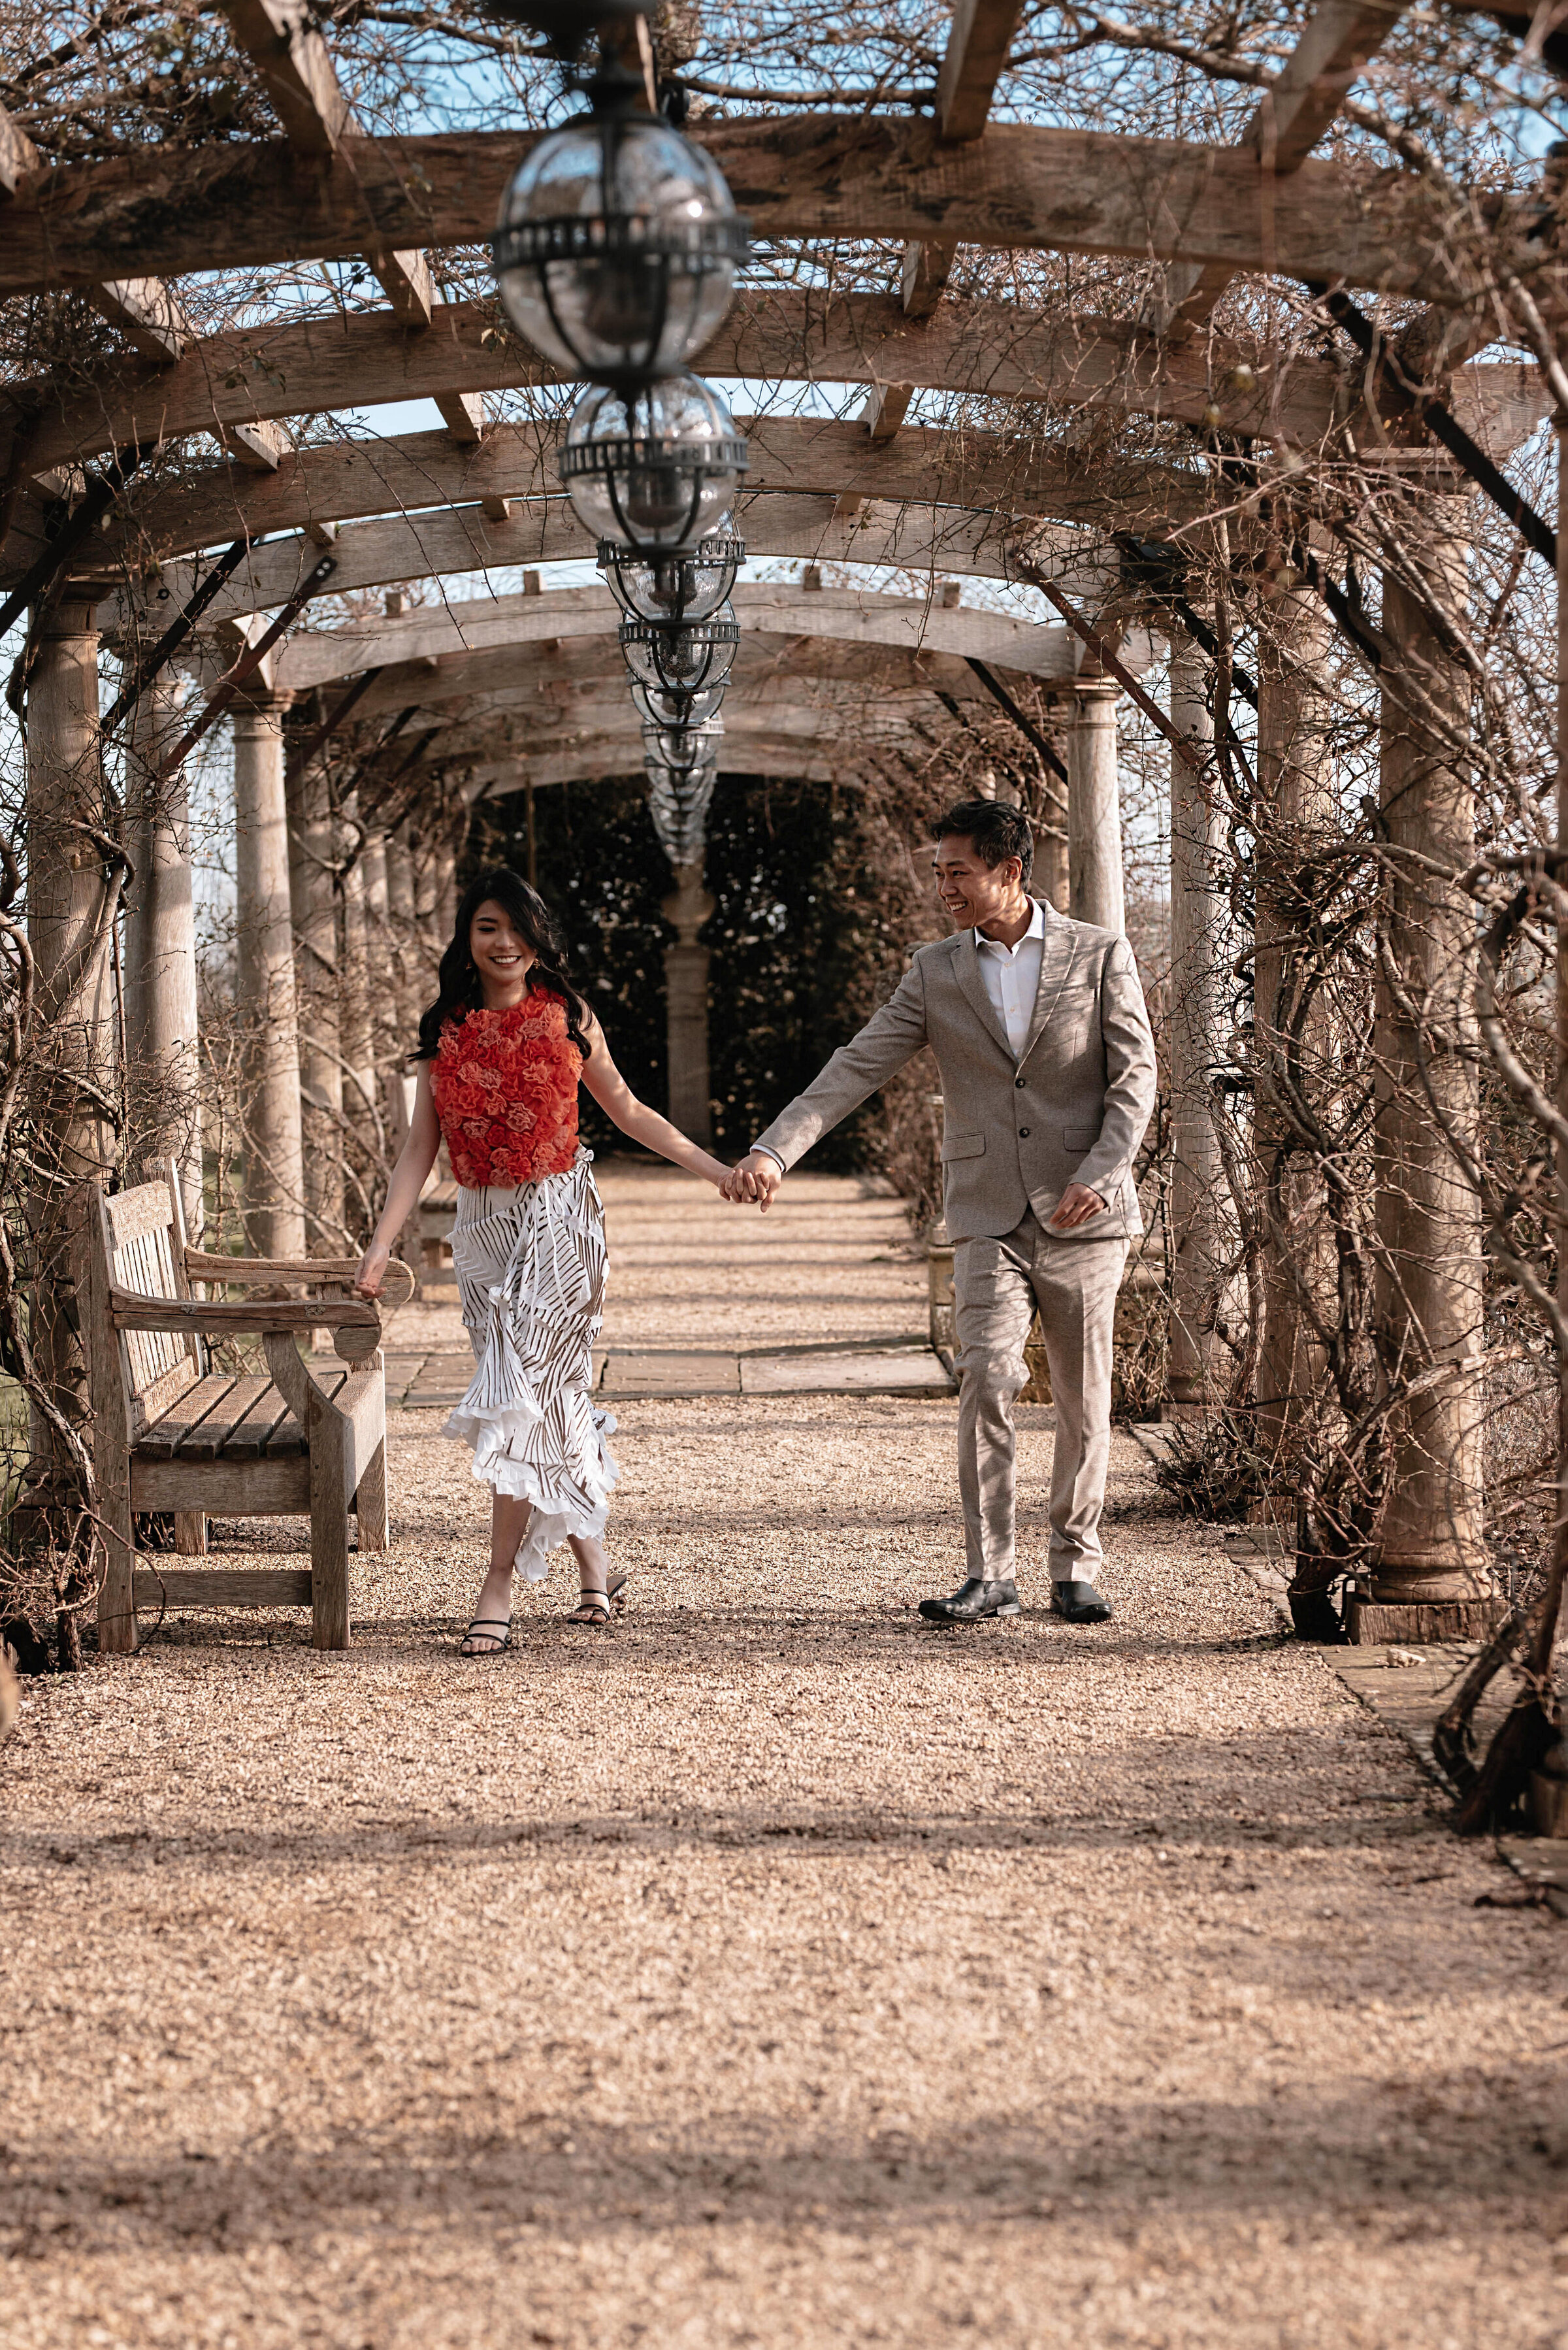 Man and woman laughing and walking hand in hand towards the camera, underneath a pergola entwined with vines